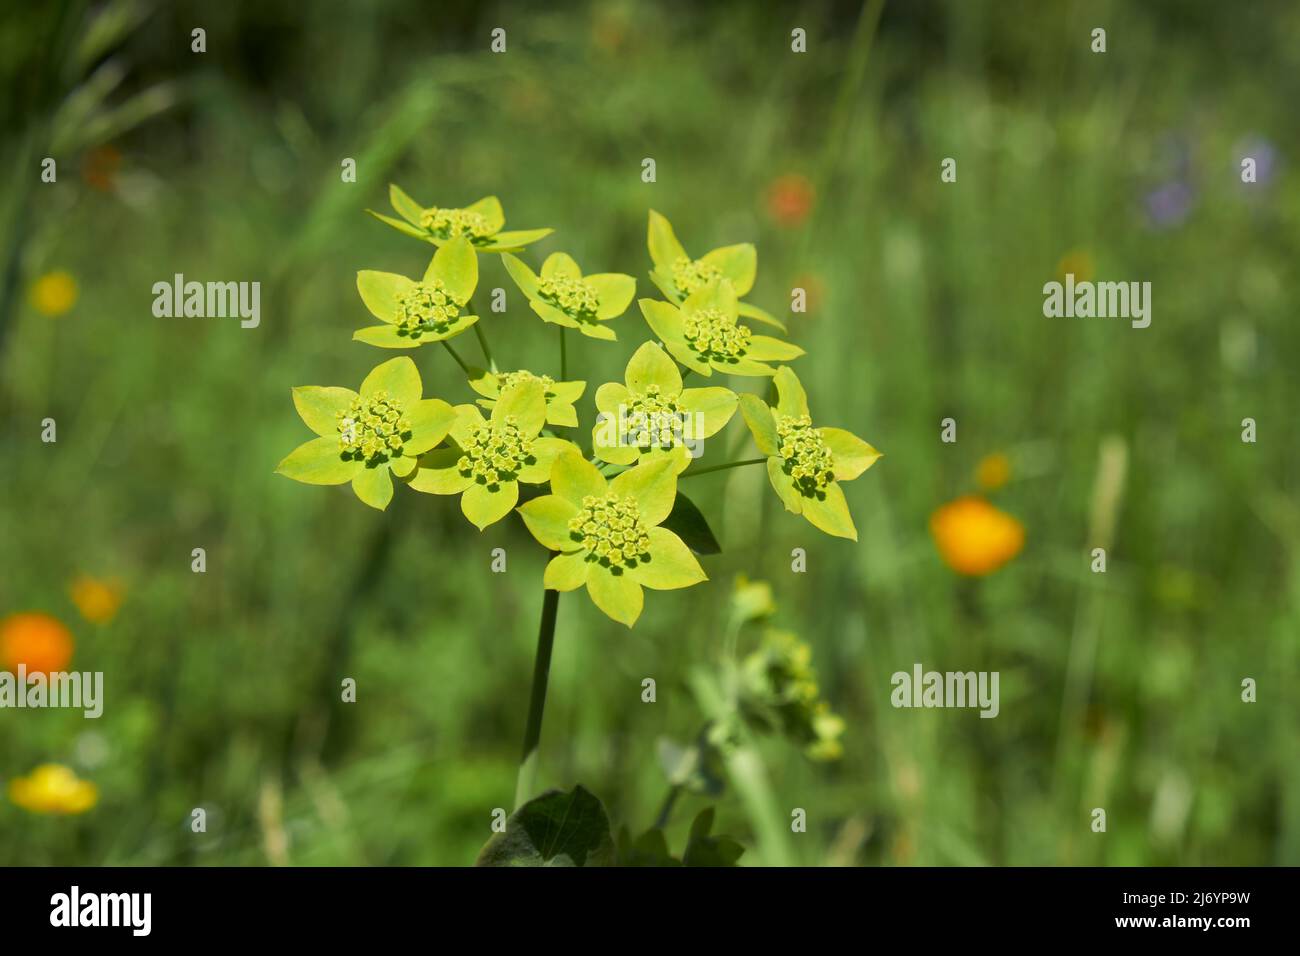 Bupleurum aureum, belonging to the family Apiaceae in natural subalpine environment. Widely known as a medicinal plant. Altai mountains. Stock Photo